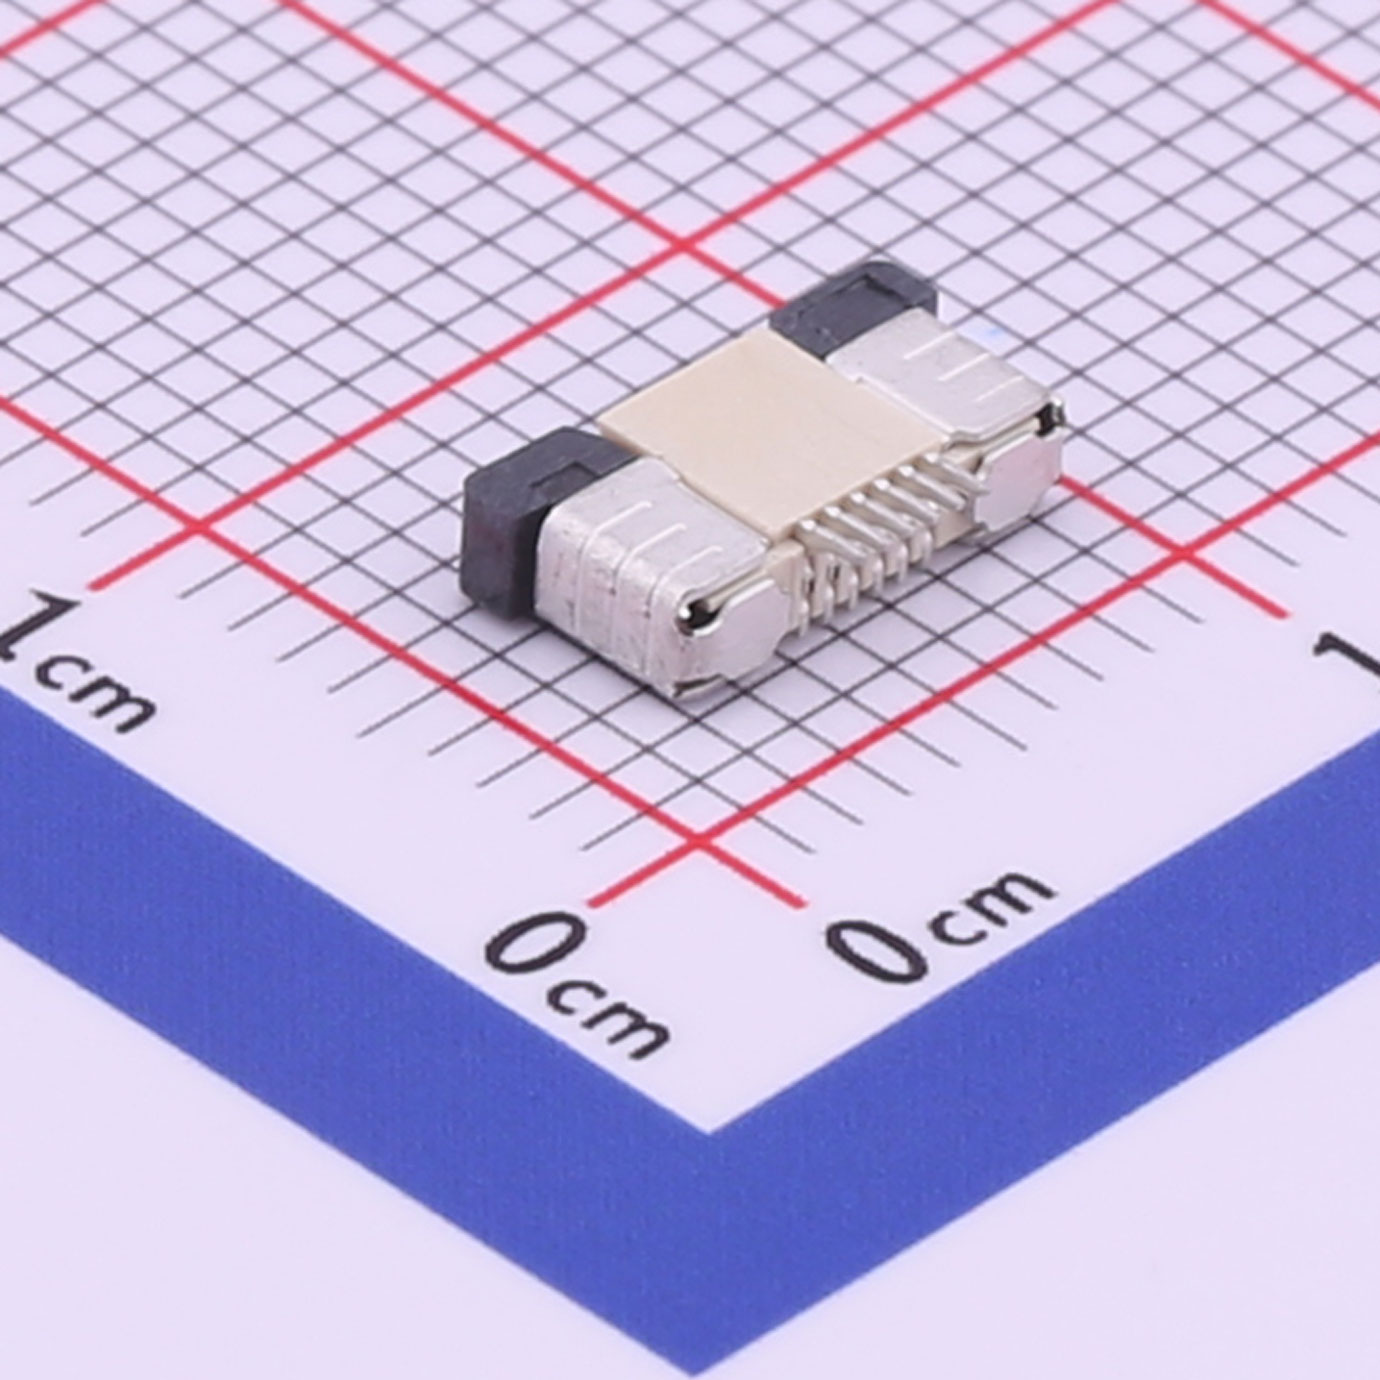 Kinghelm 0.5mm Pitch FPC FFC Connector 6P Height 2mm Drawer type lower connection SMT FPC Connector